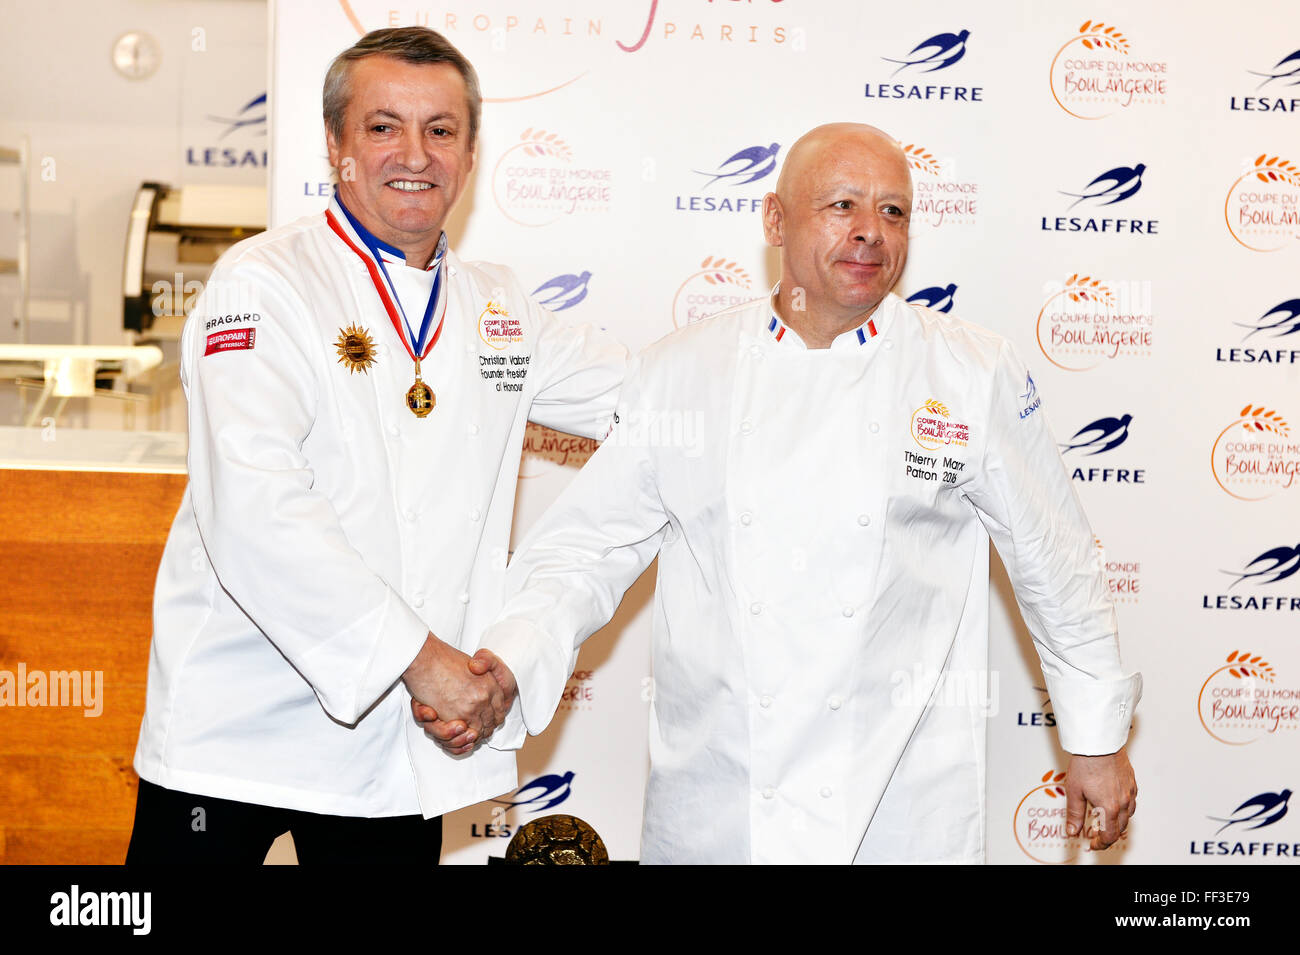 9th of february, Paris, France South Korea team won the Bakery World Cup 2016 in Paris-Nord Exhibition center of Villepinte Stock Photo